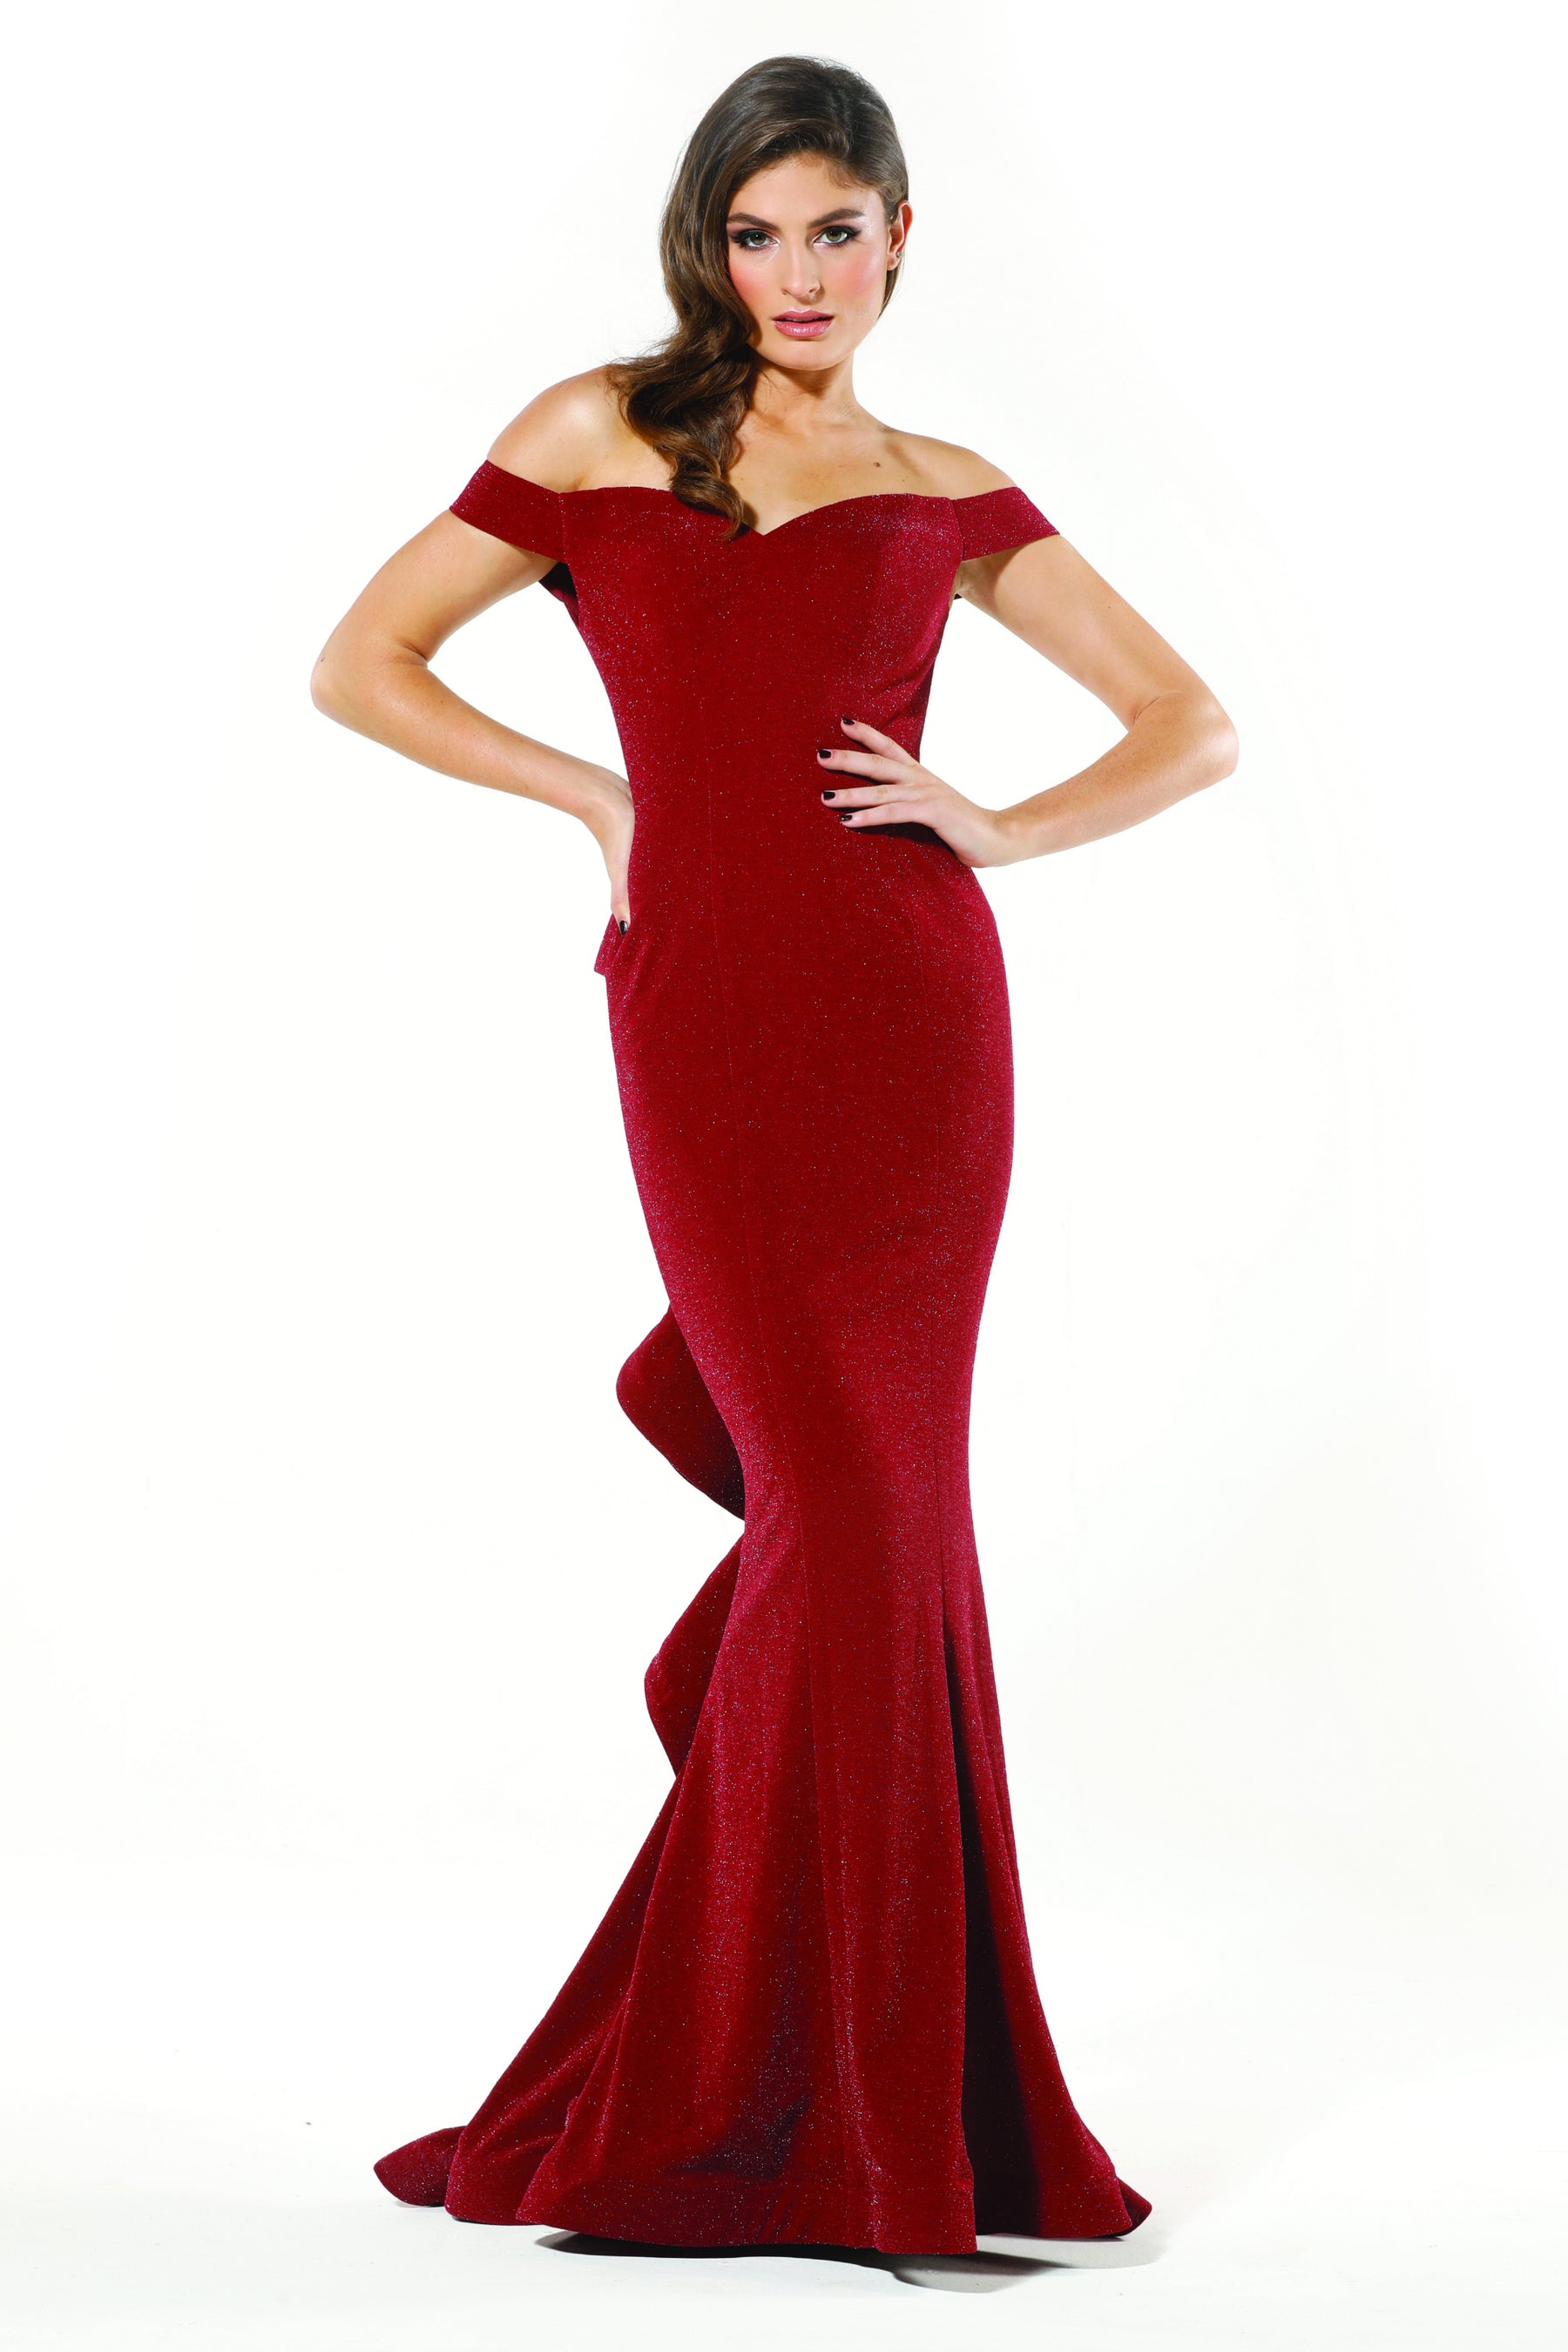 Tinaholy Couture T18117 Burgundy Jersey Off Shoulder Formal Gown